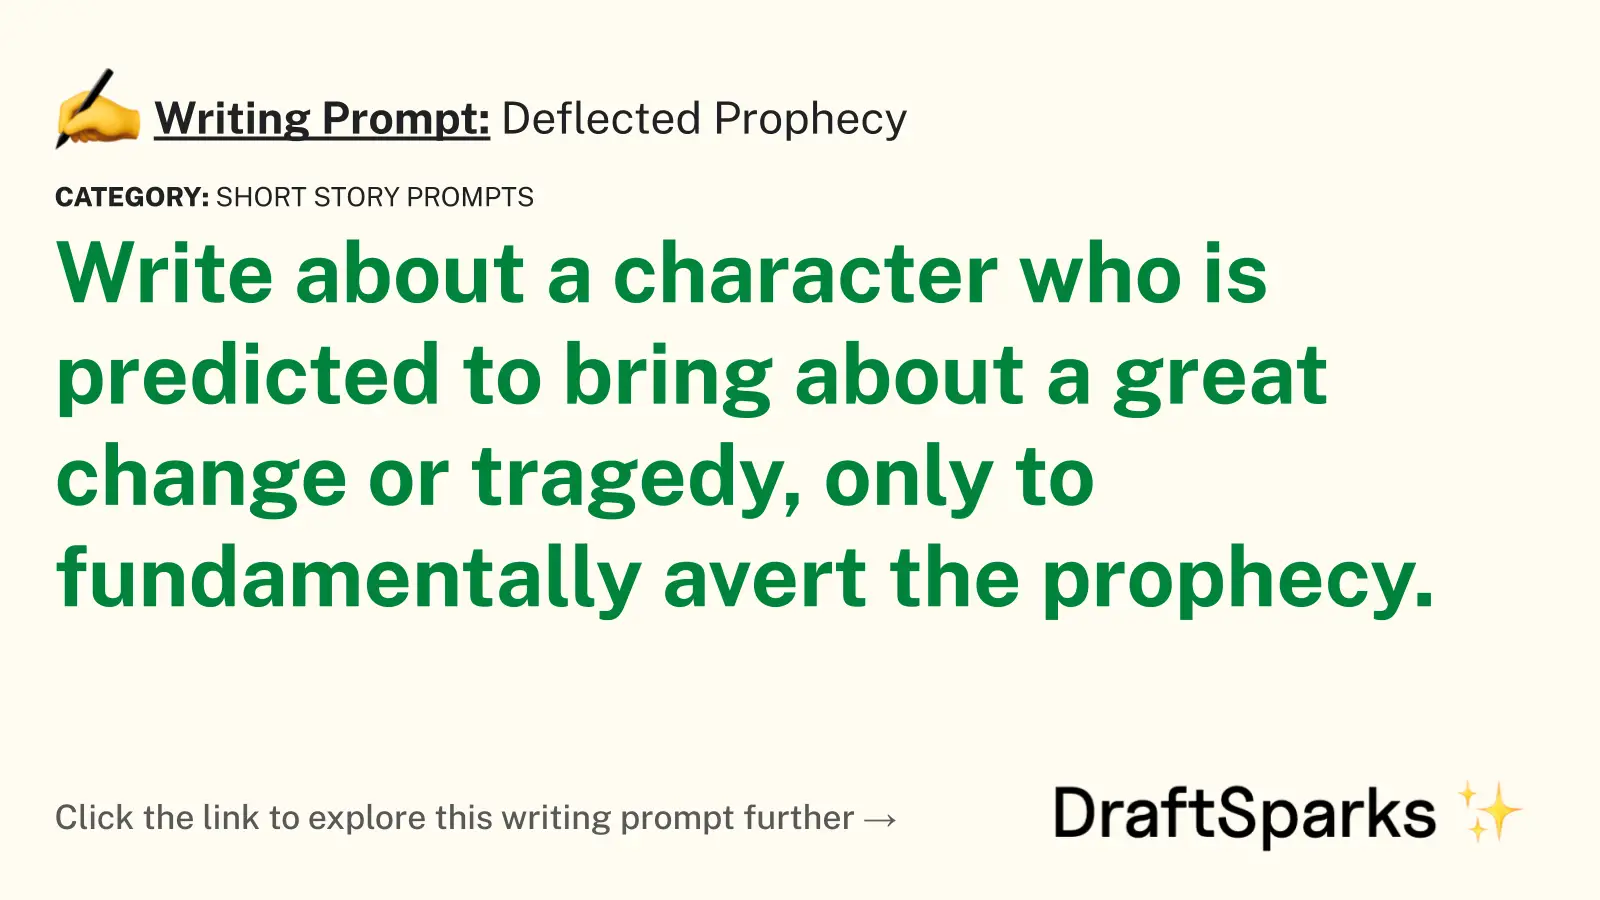 Deflected Prophecy